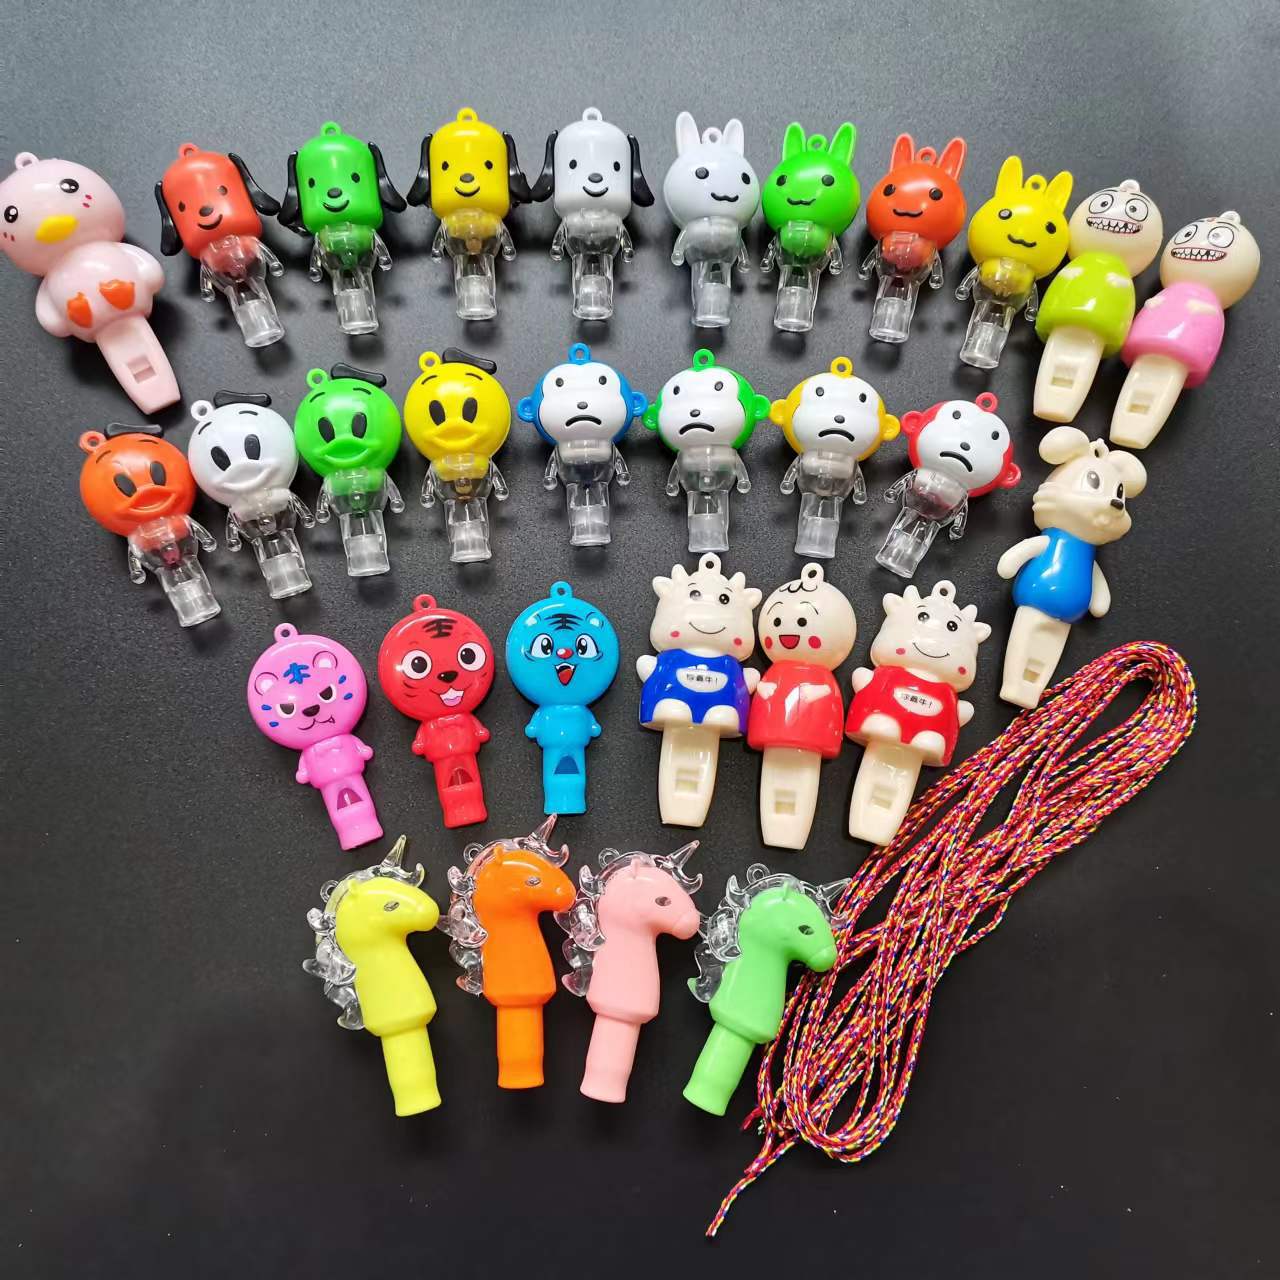 Luminous Whistle Keychain Pendant Children's Holiday Gifts Luminous Cartoon Small Toy Internet Celebrity Small Gift Gift